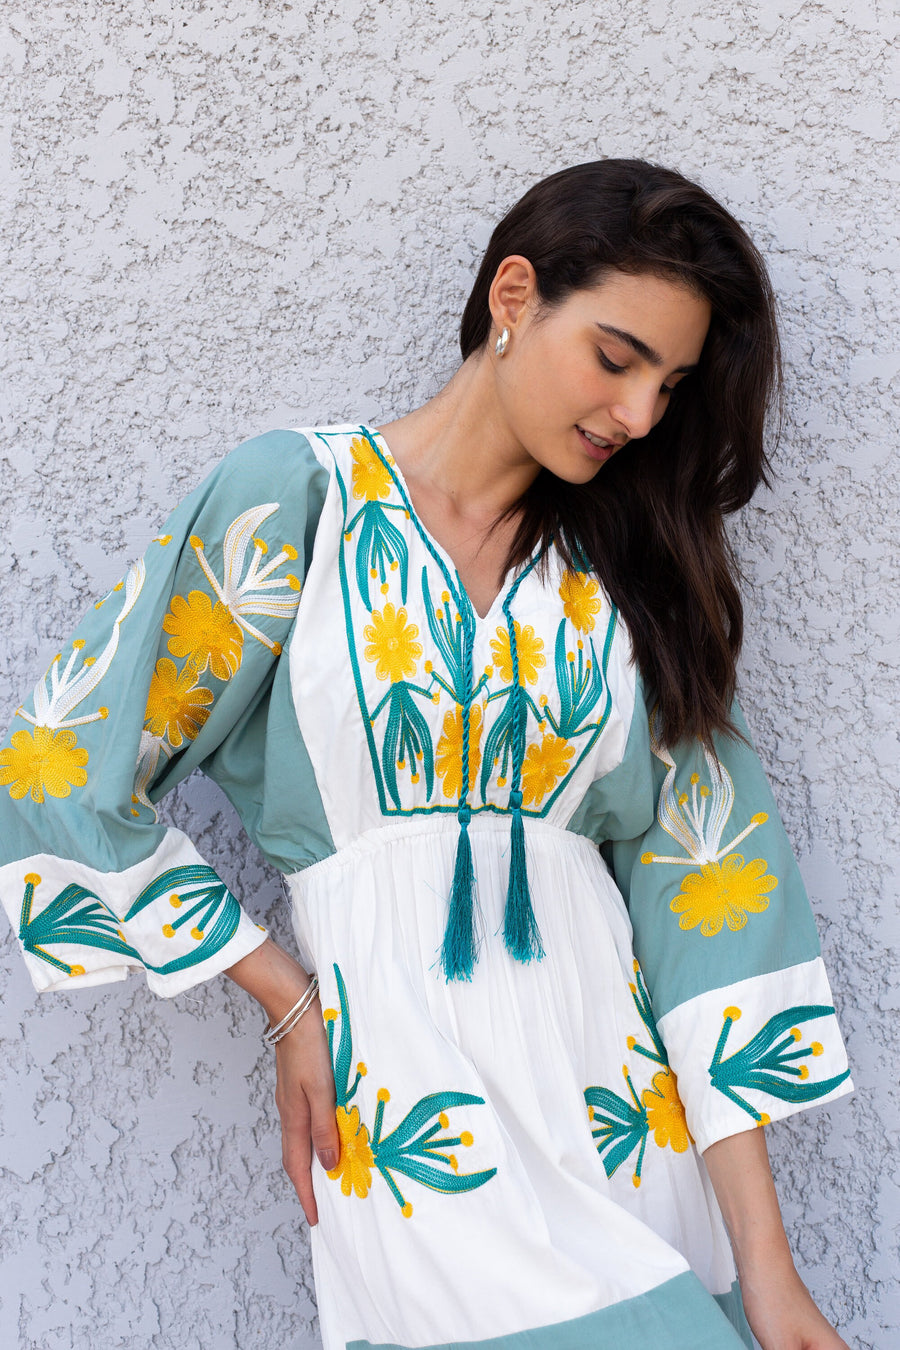 Colorful embroidered white/mint caftan, Cotton caftan dress, African women clothing, Boho maxi dress, Cotton caftan, Boho summer caftan